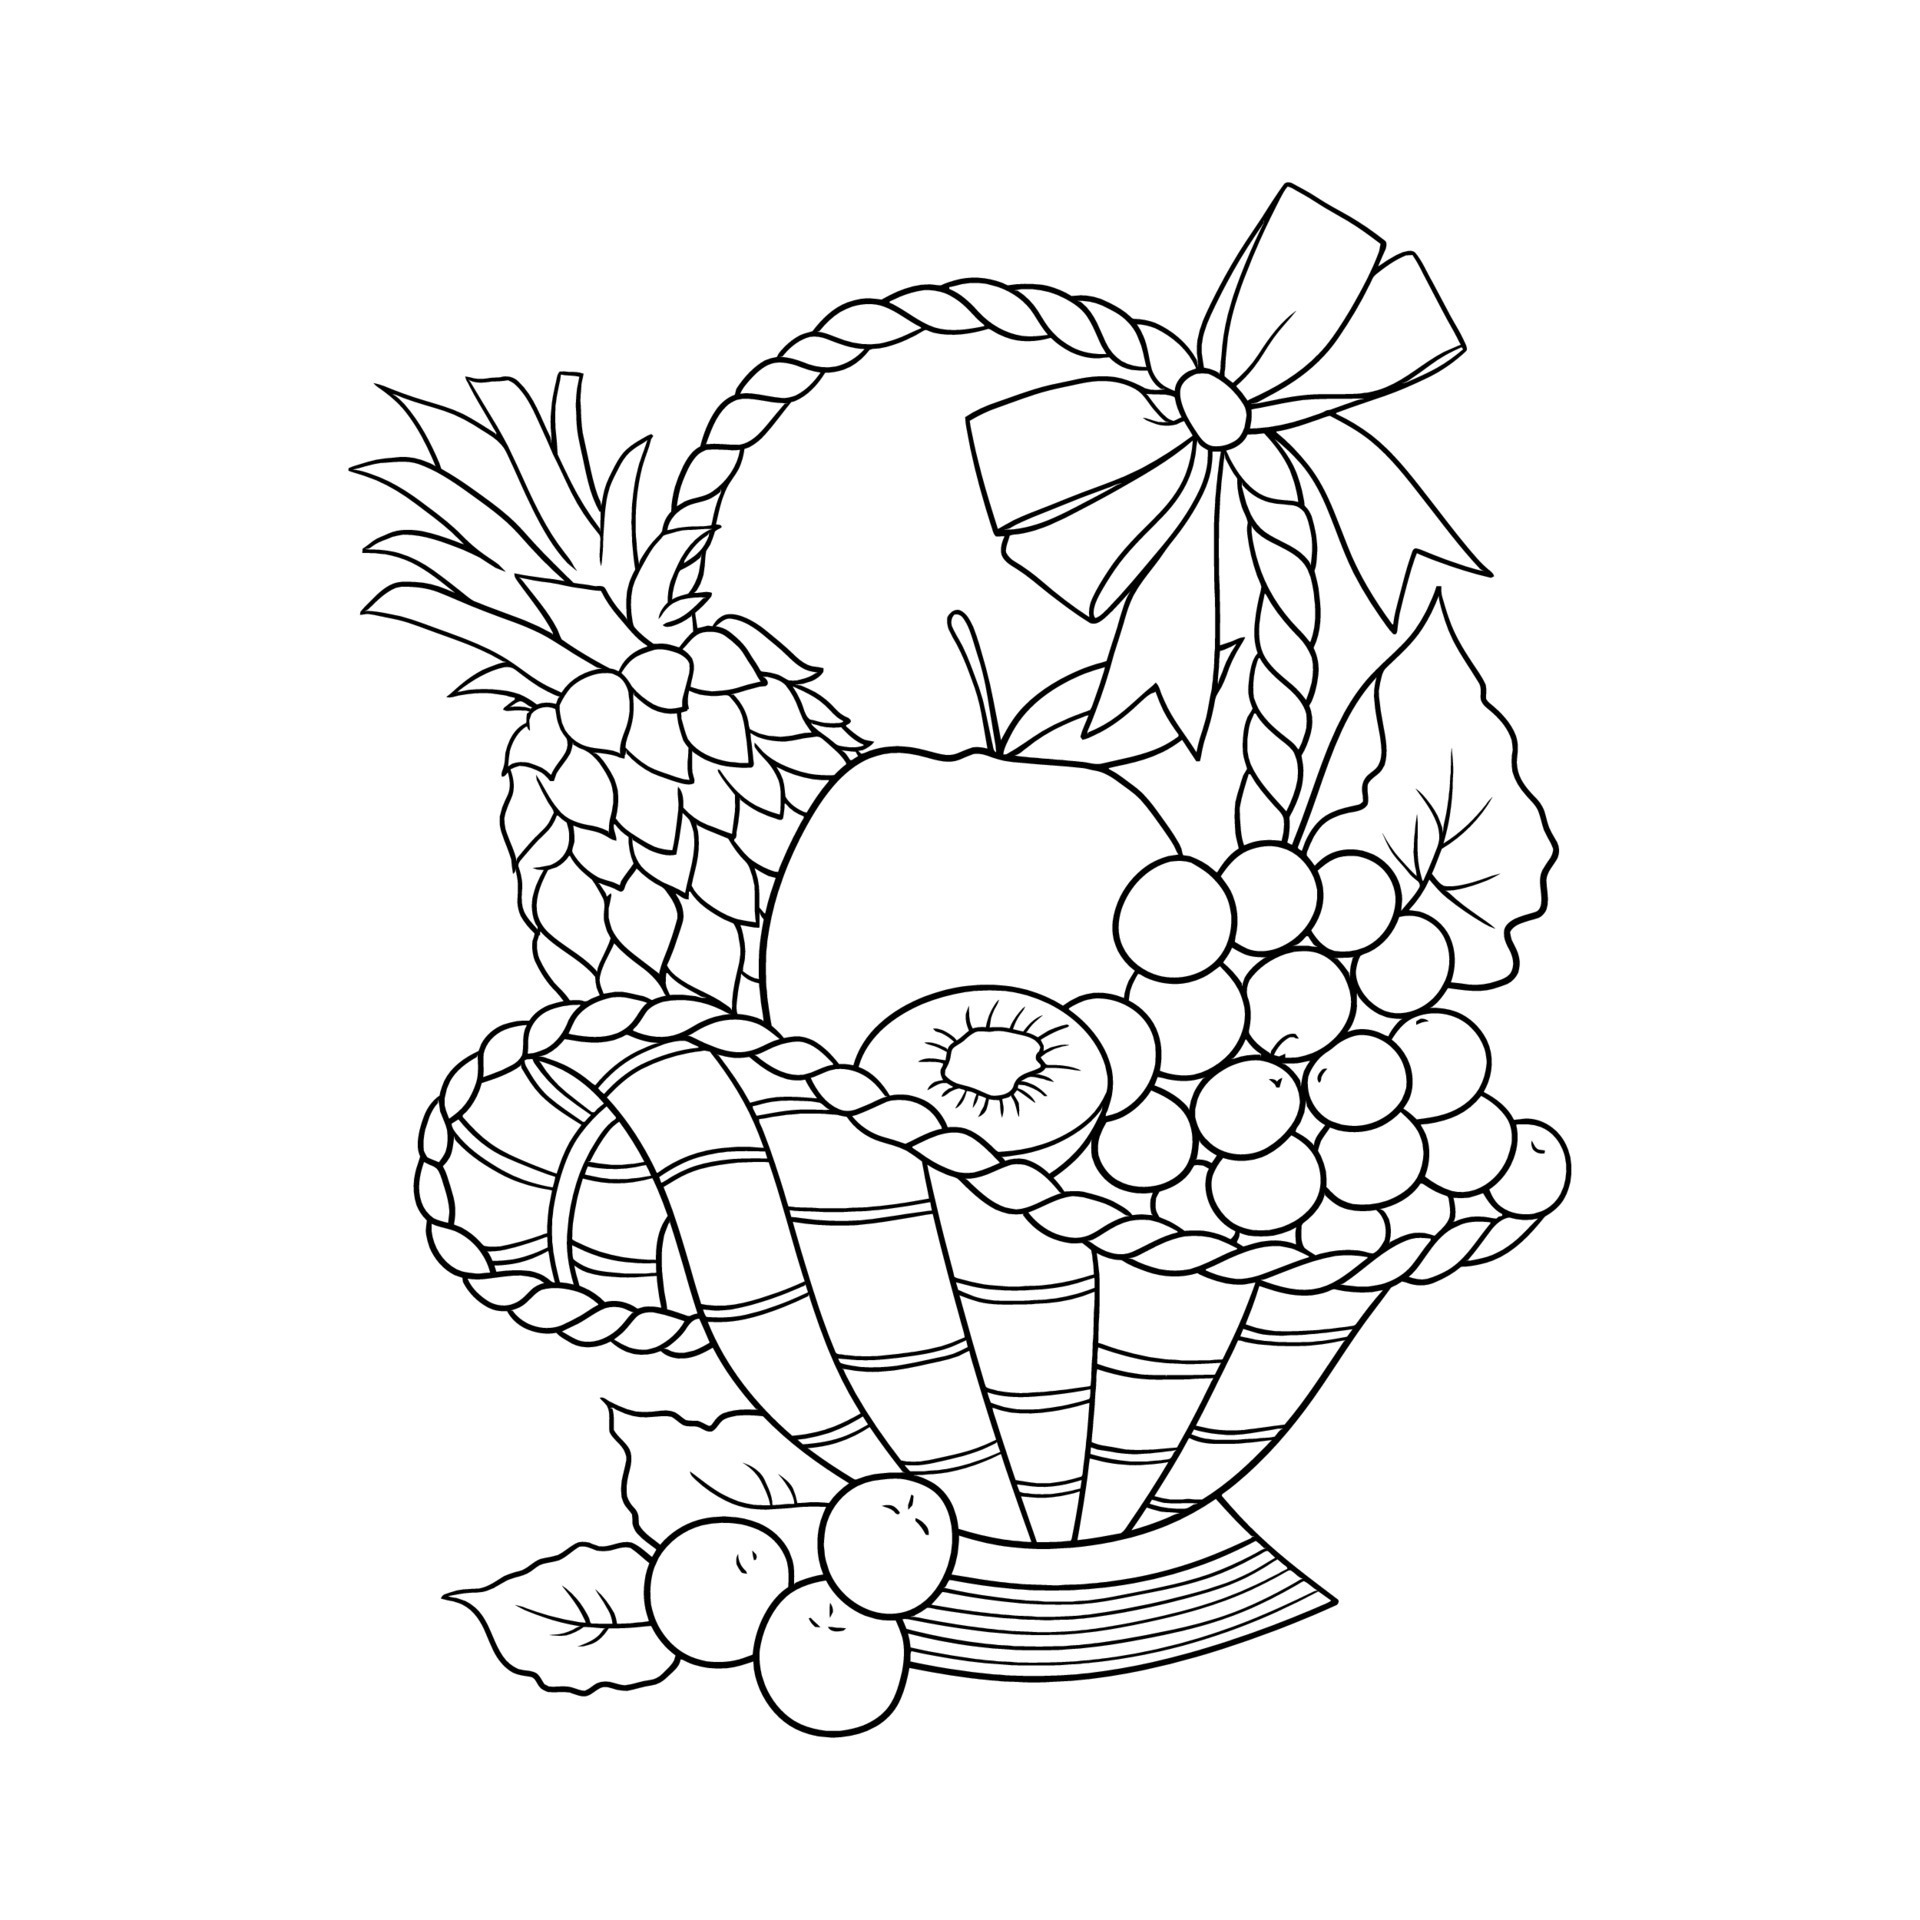 How to draw a fruit basket step by step  YouTube